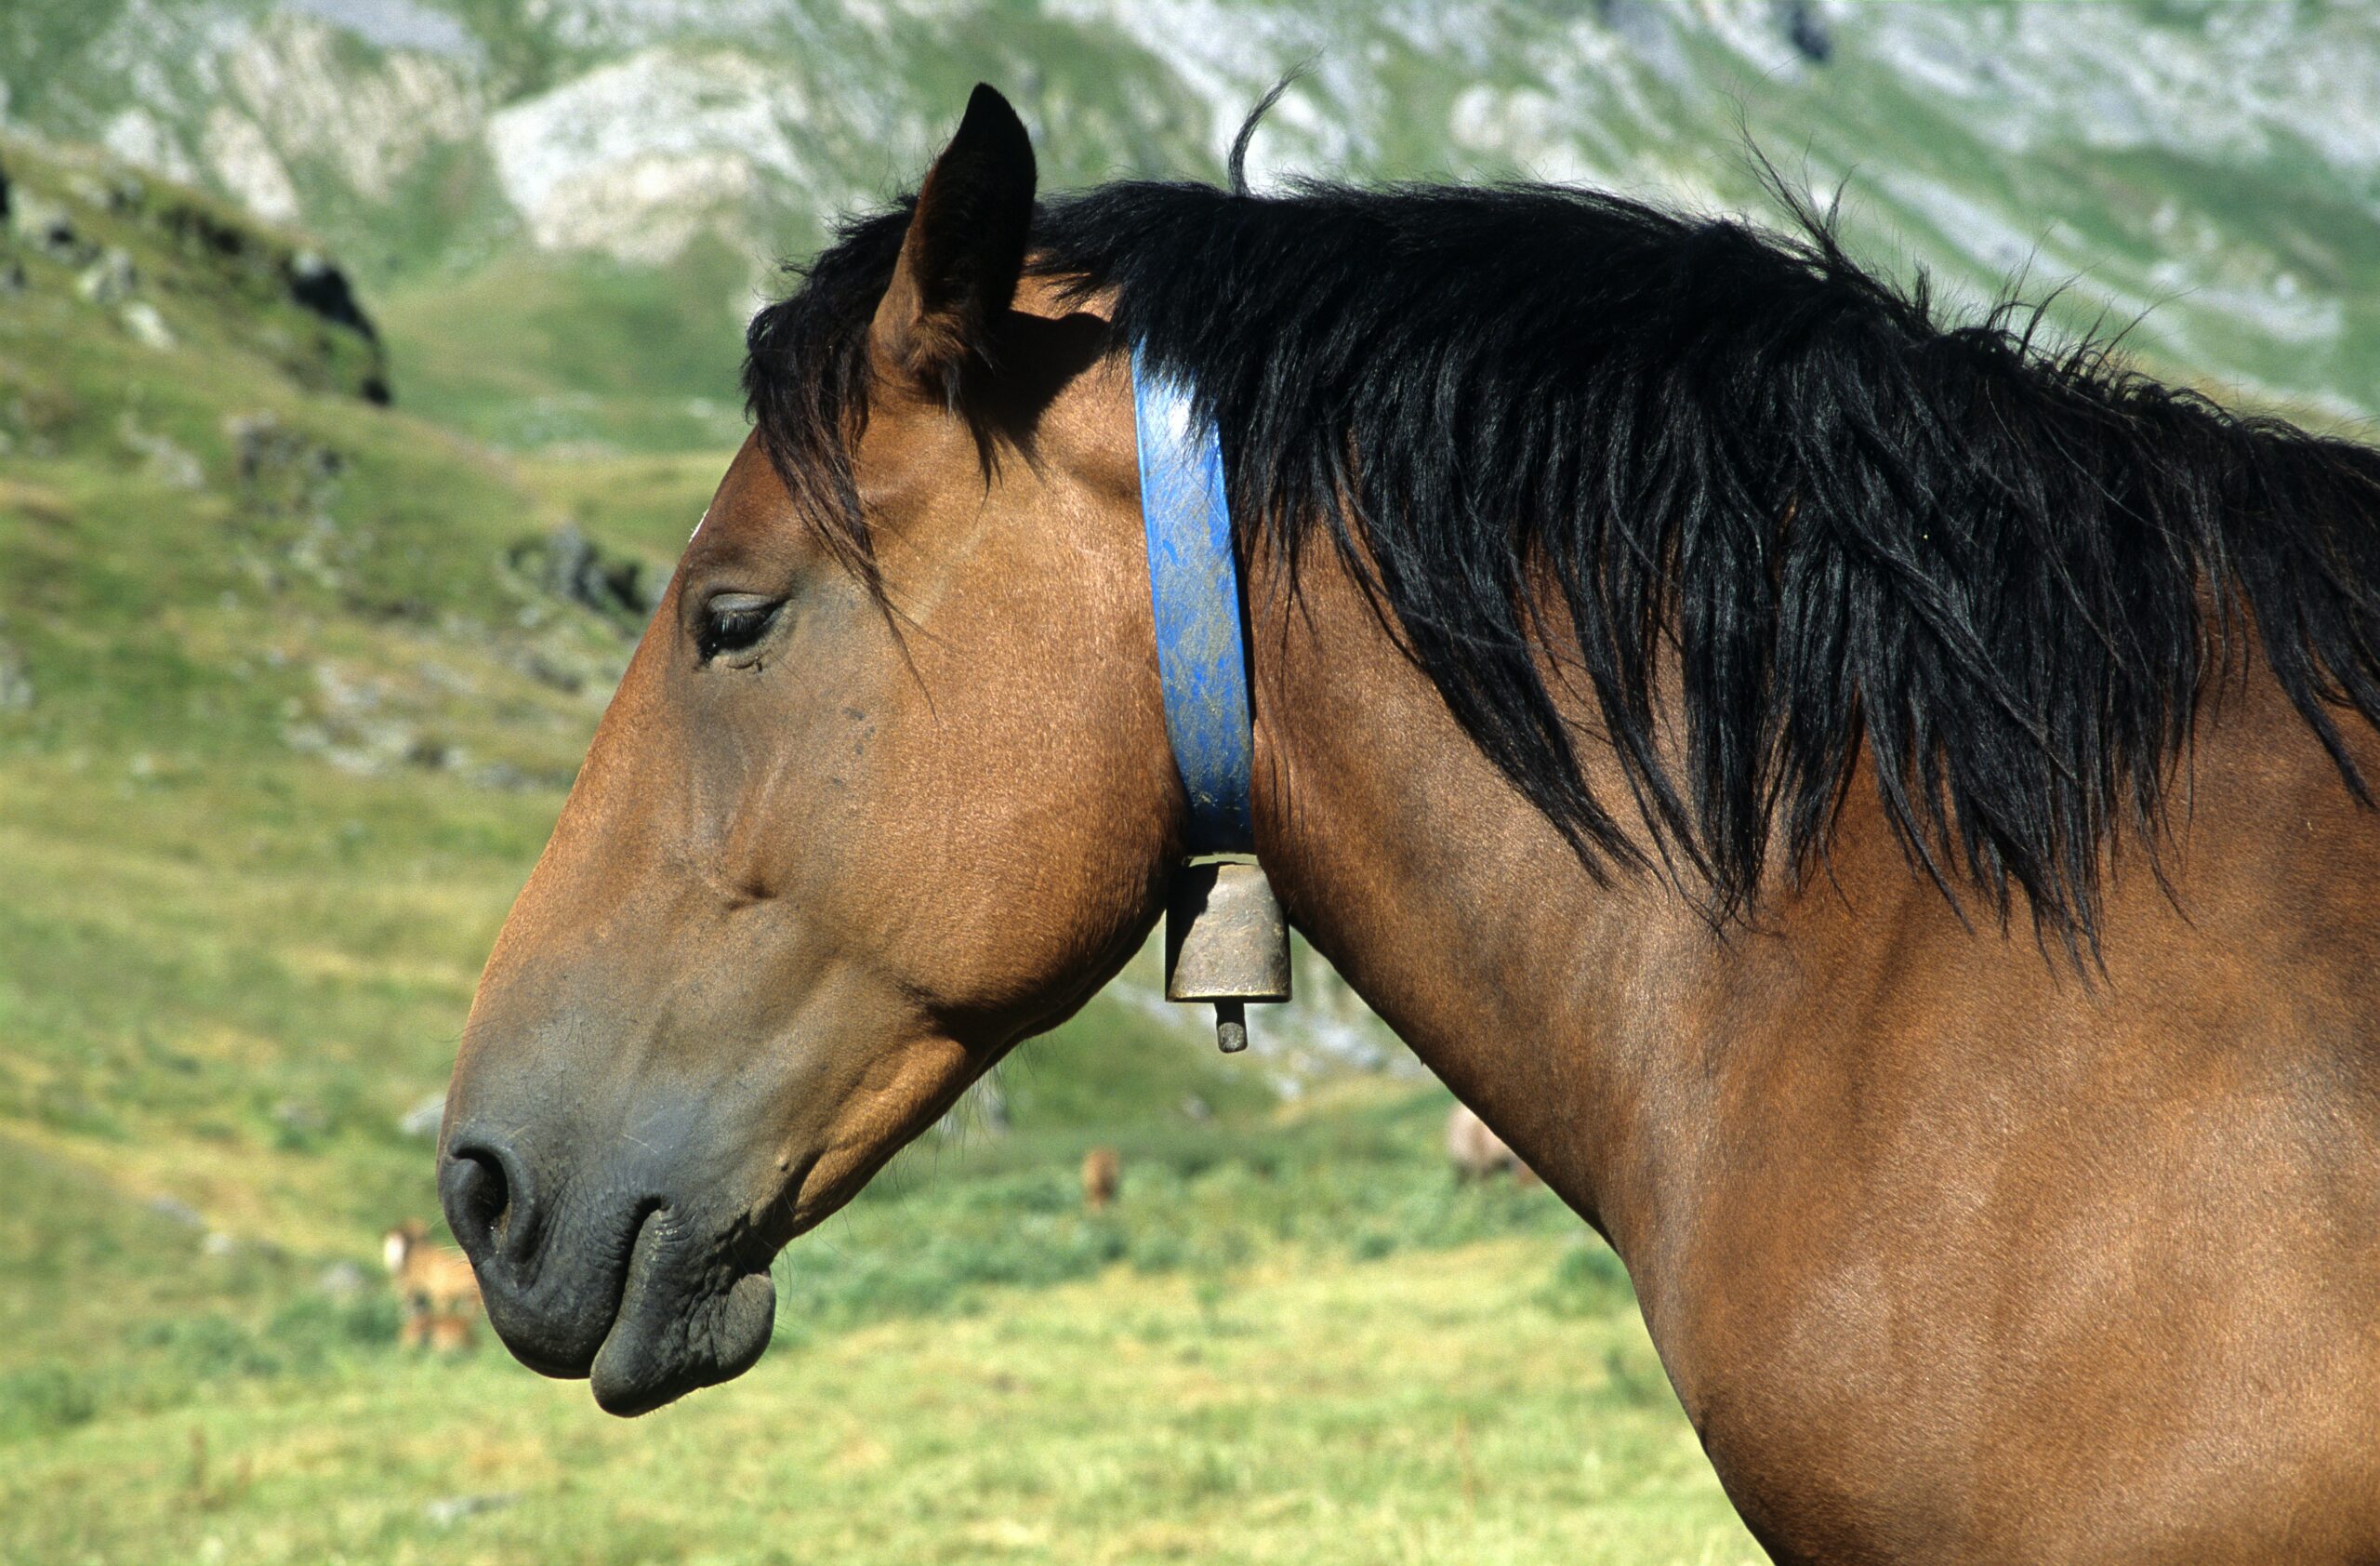 What Should I Feed My Horse Before Riding?